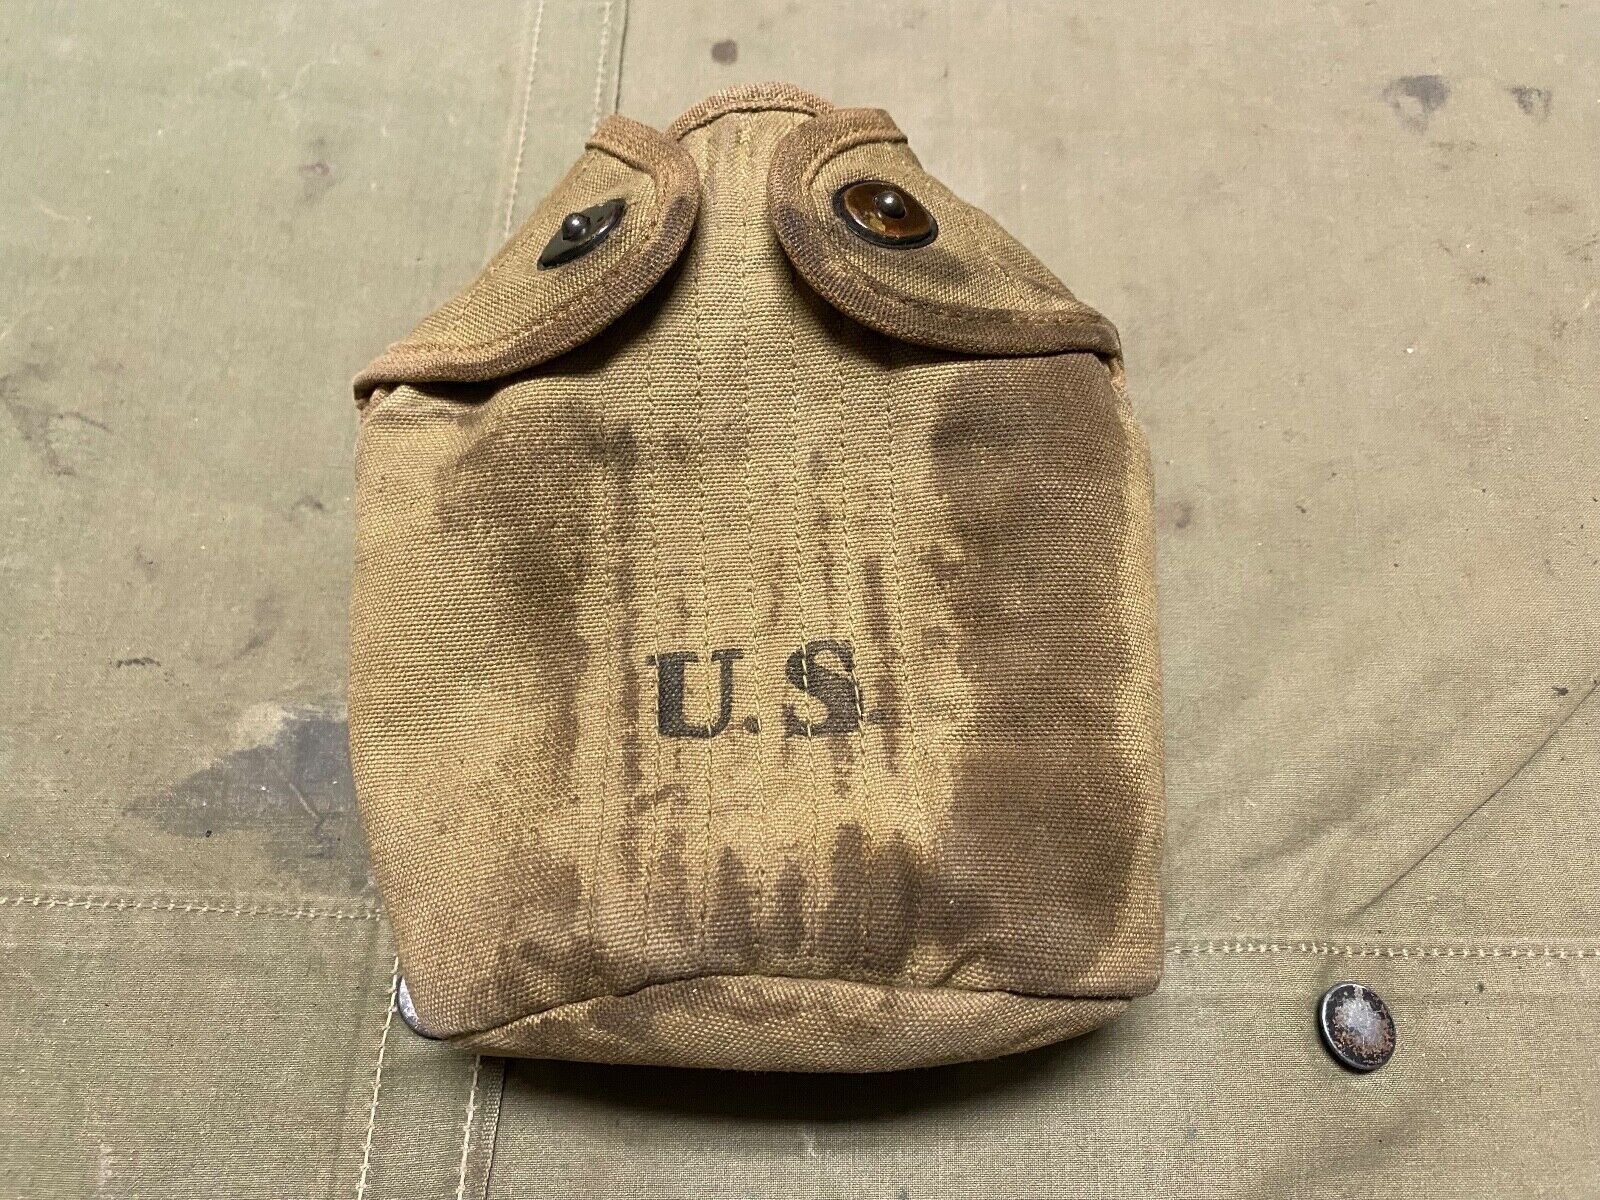 ORIGINAL WWI WWII US ARMY M1910 CANTEEN CARRIER COVER-DATED:1918